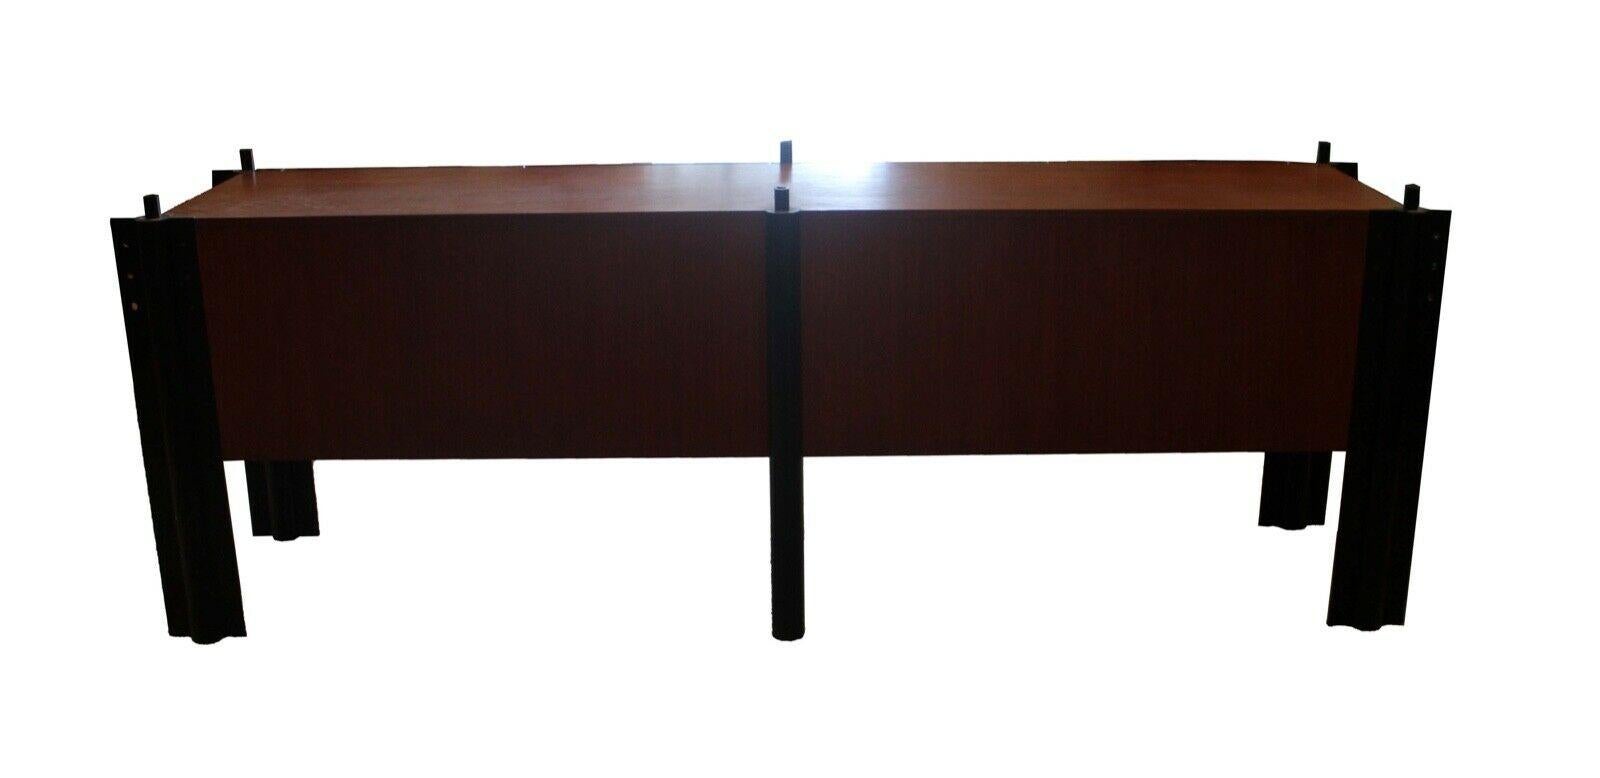 One of a kind monumental custom made solid walnut credenza with beautiful granite top and memphis style steel black metal legs. Includes 2 drawers and 2 shelfs. Truly amazing and in excellent condition. Dimensions: 109 W x 23 D x 34.5 H.